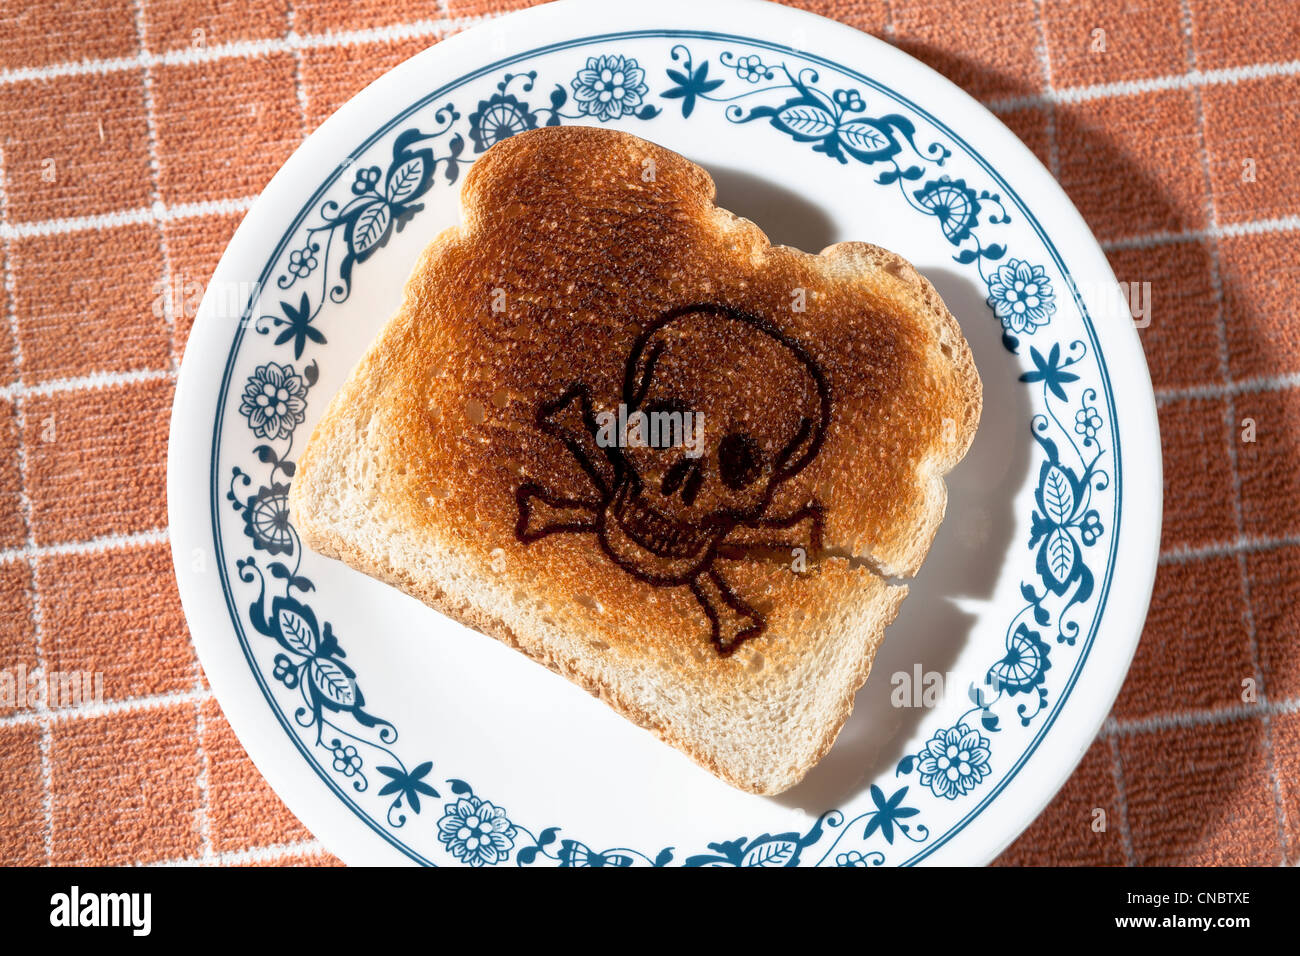 skull and crossed bones burned into a piece of toast on a plate. celiac disease Gluten Allergy Stock Photo